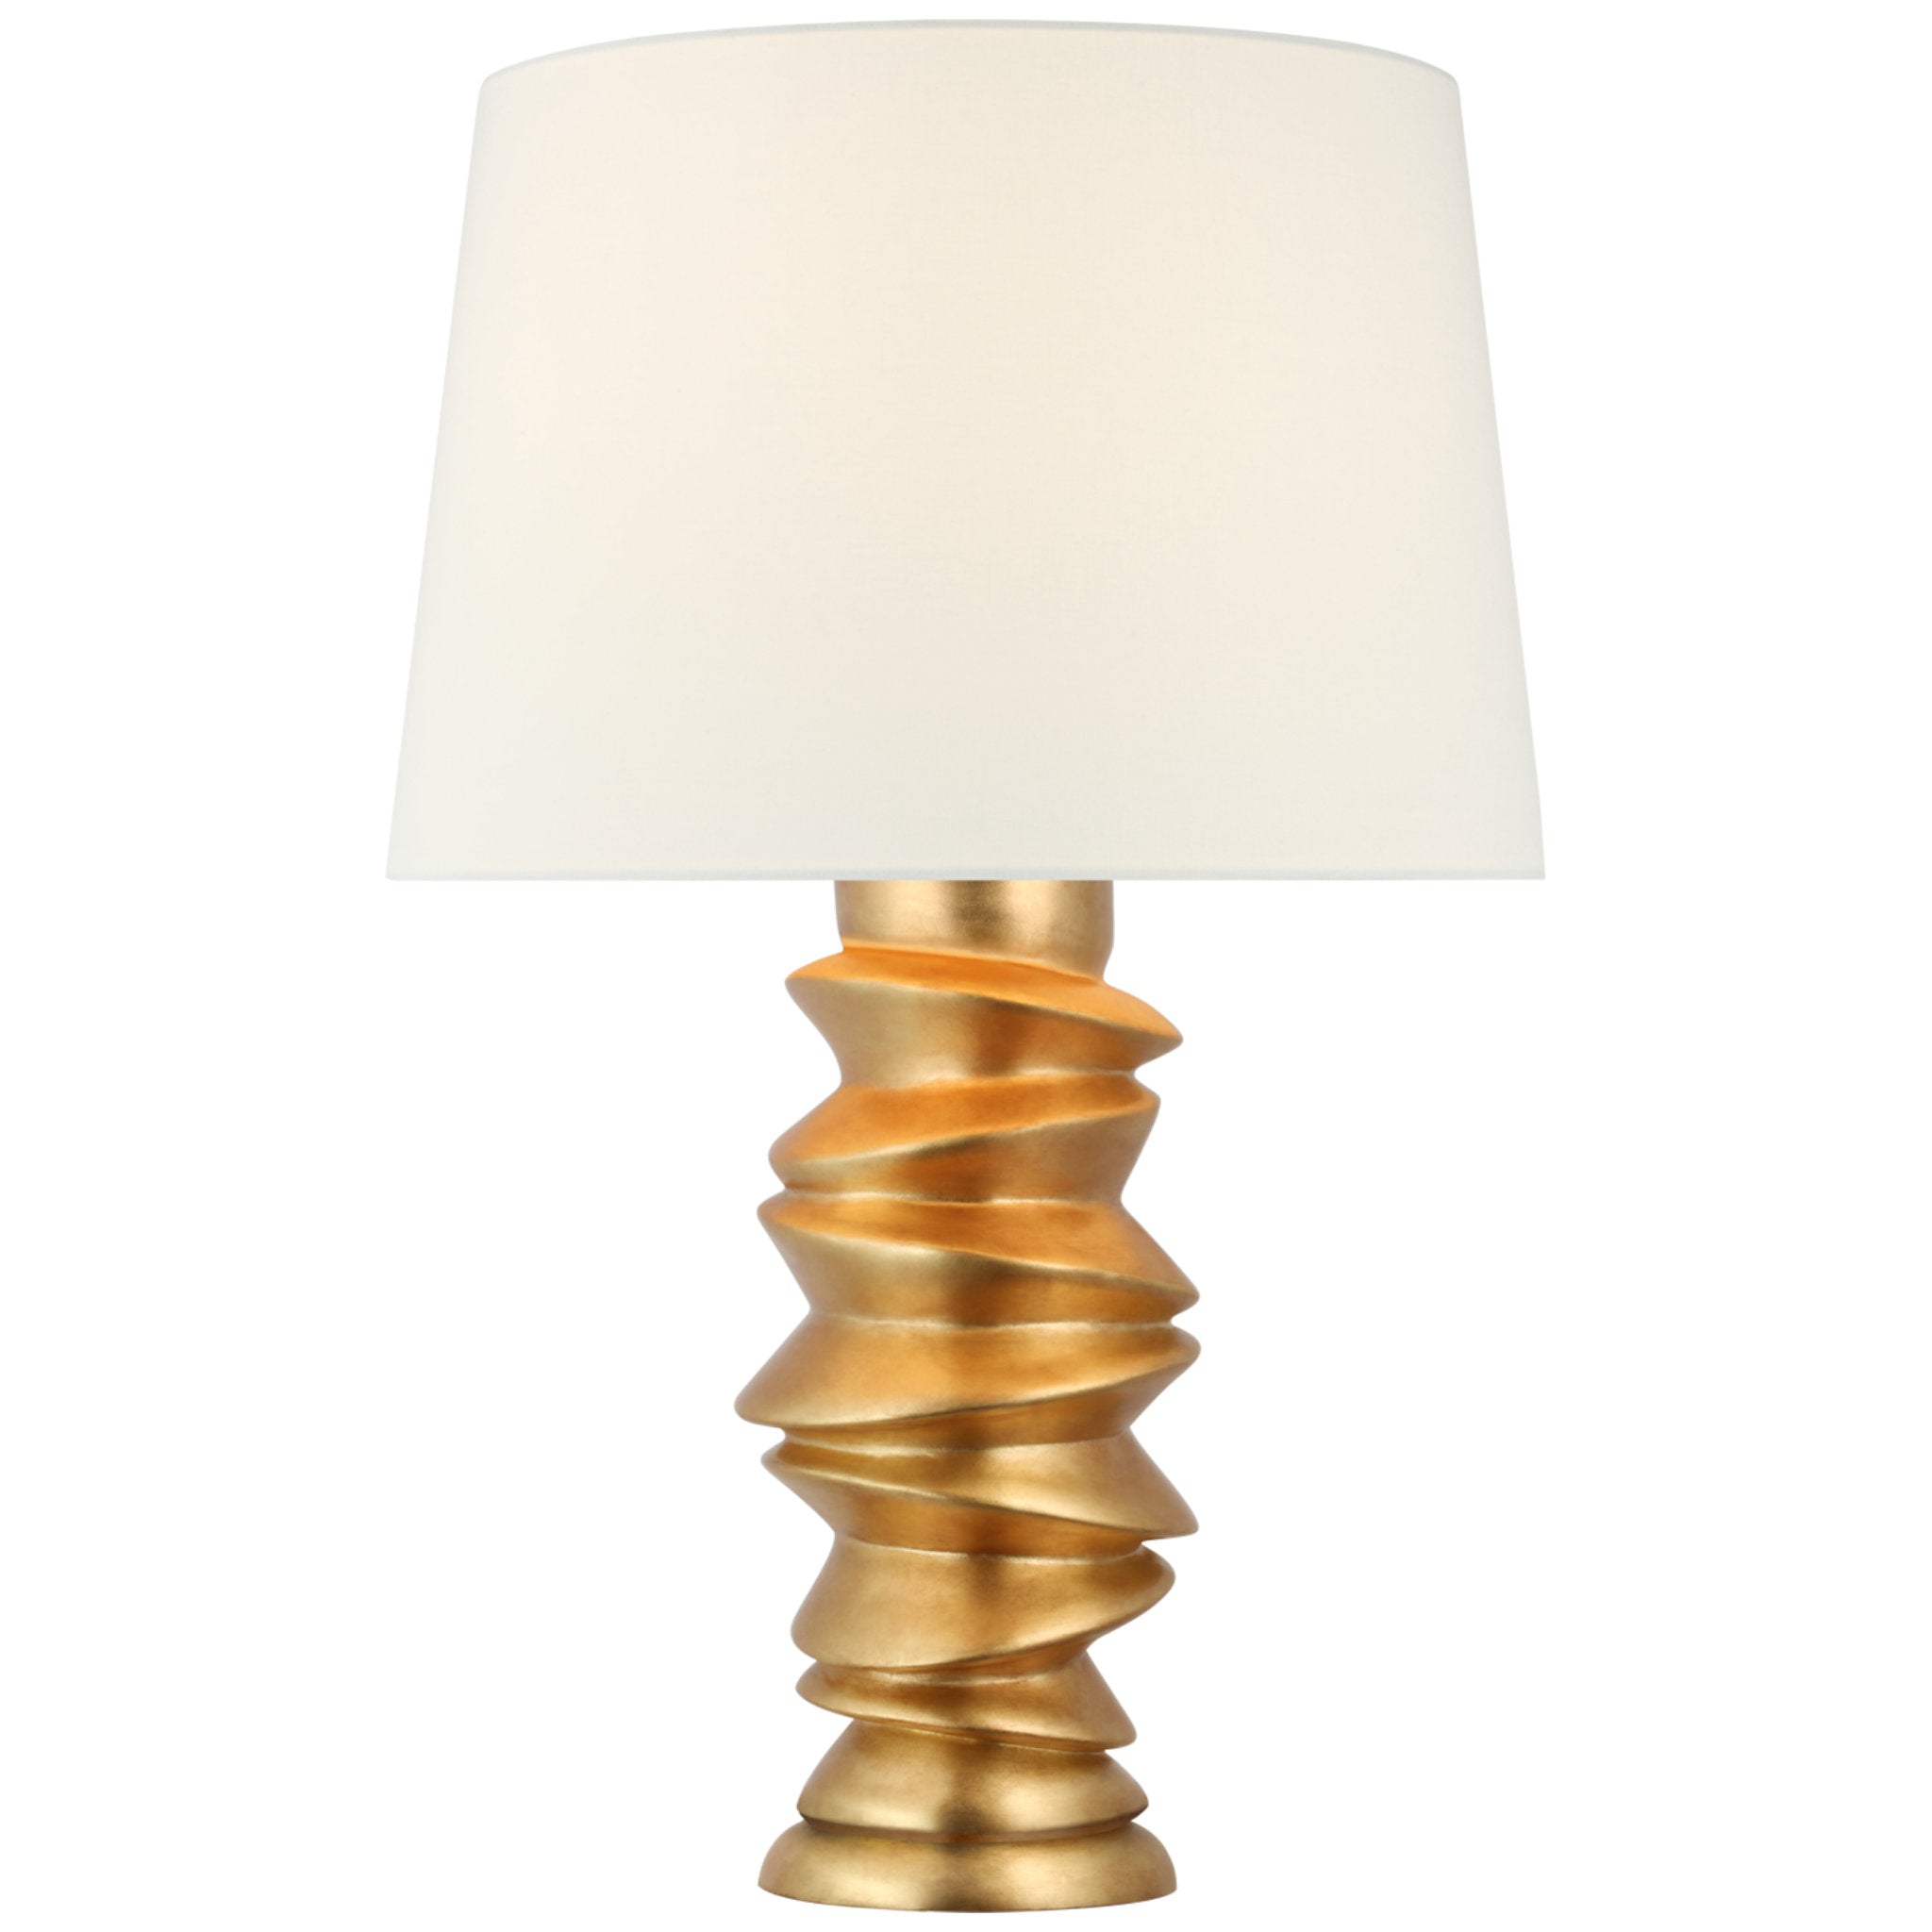 Julie Neill Karissa Medium Table Lamp in Antique Gold Leaf with Linen Shade